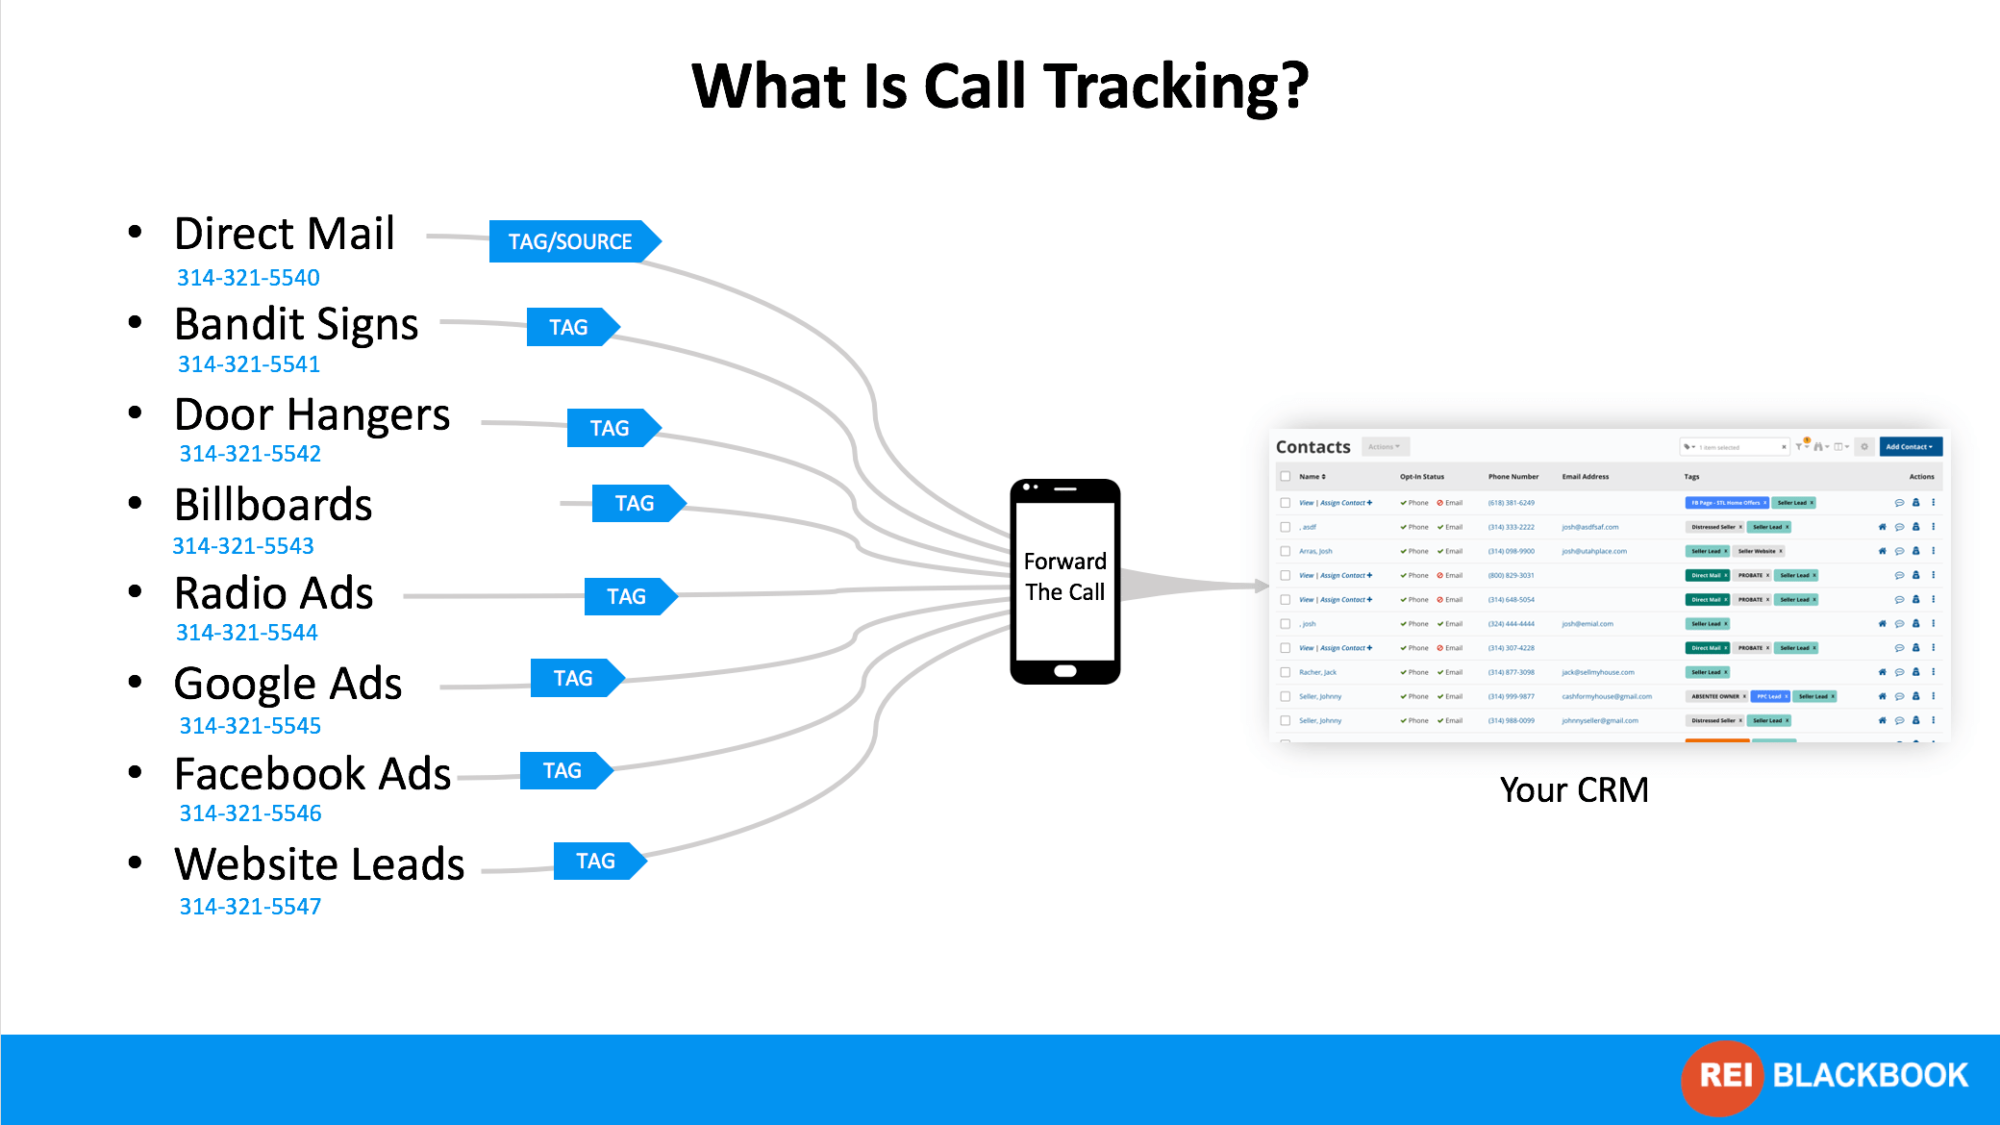 The graphic shows how a call tracking system works and how it is built. 